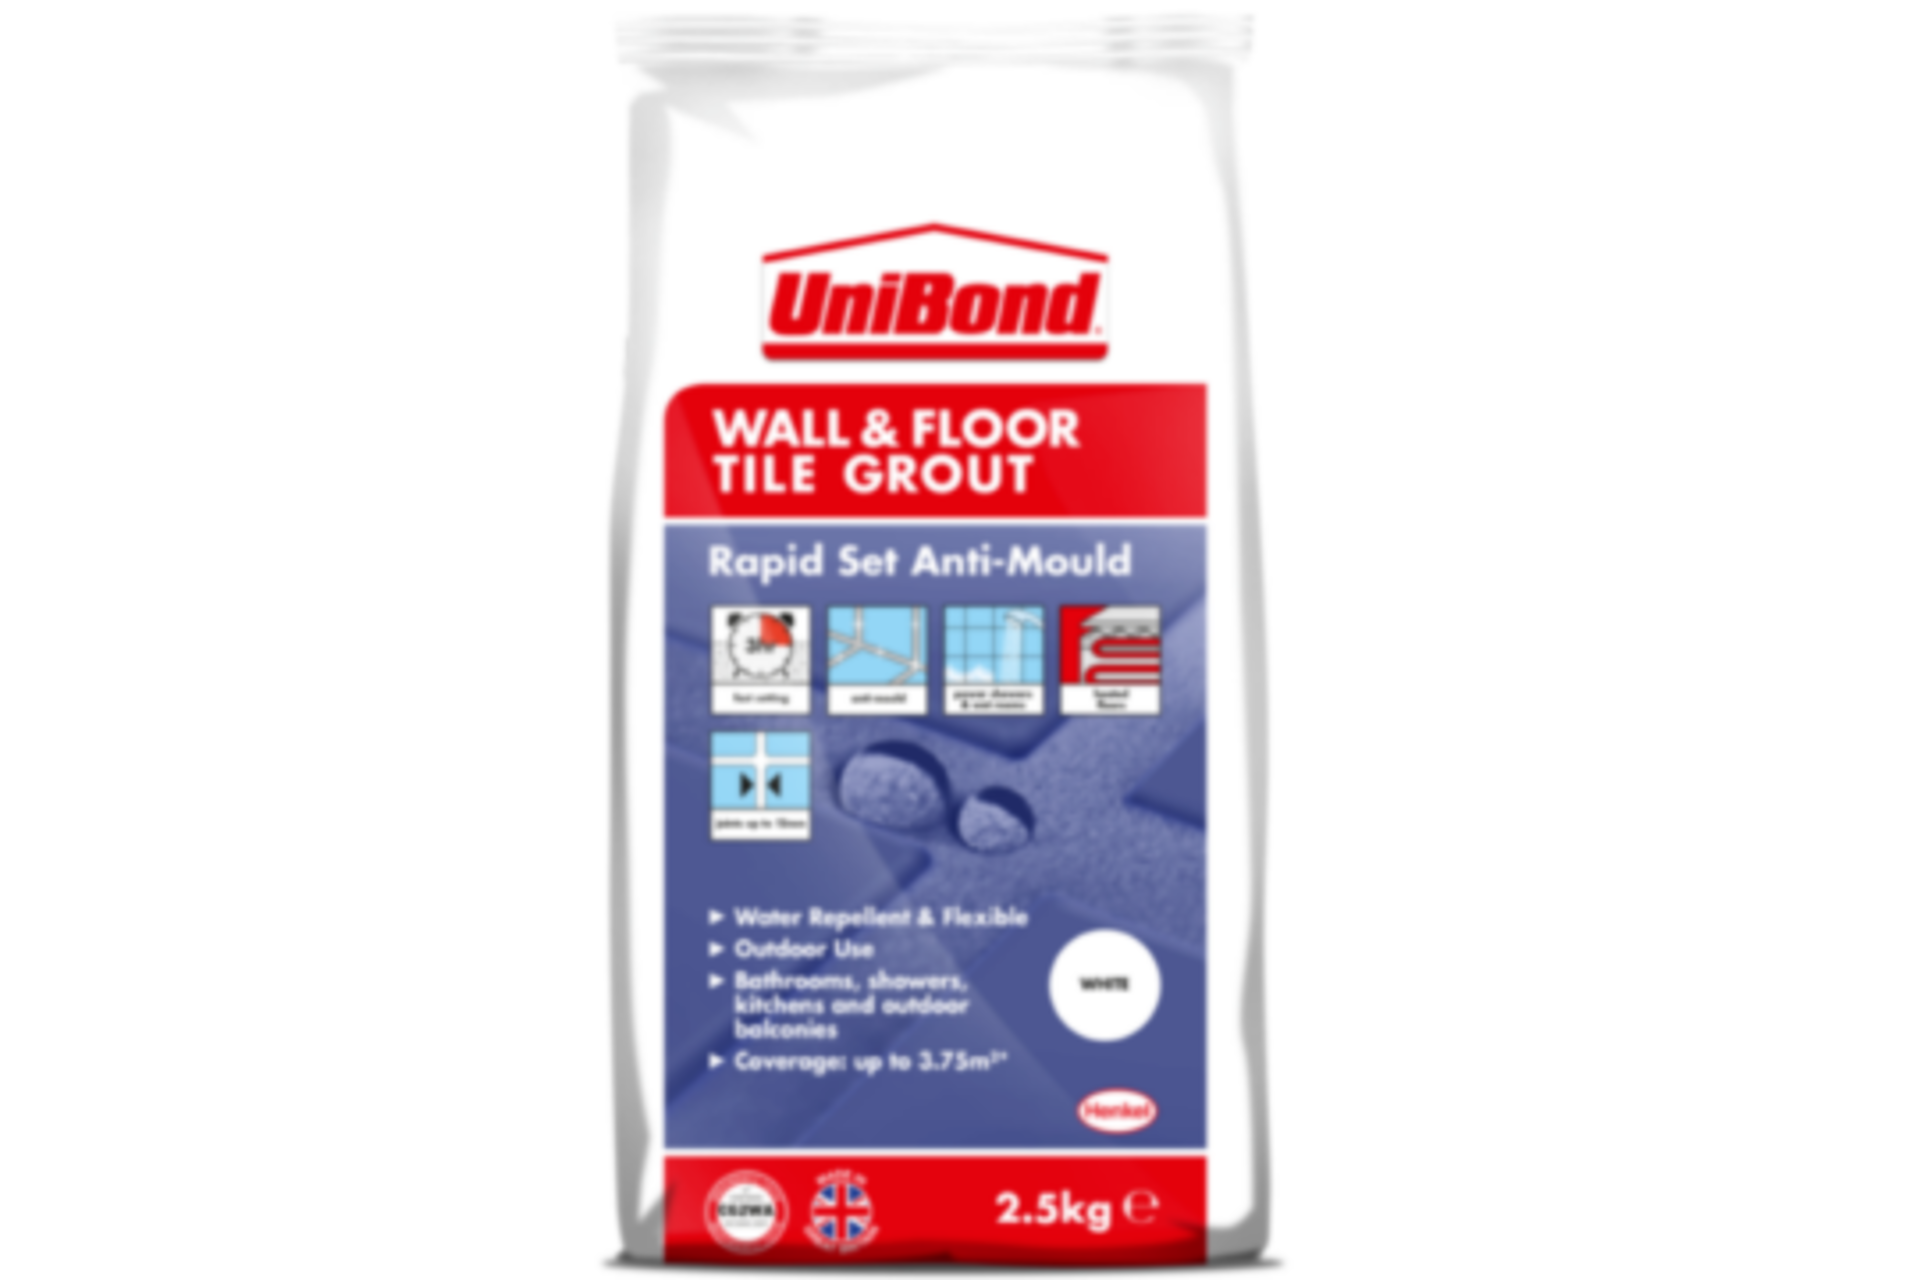 PALLET TO CONTAIN 240 X 2.5KG BAGS OF UNIBOND WALL & FLOOR TILE GROUT. WATER REPELLENT & FLEXIBLE.